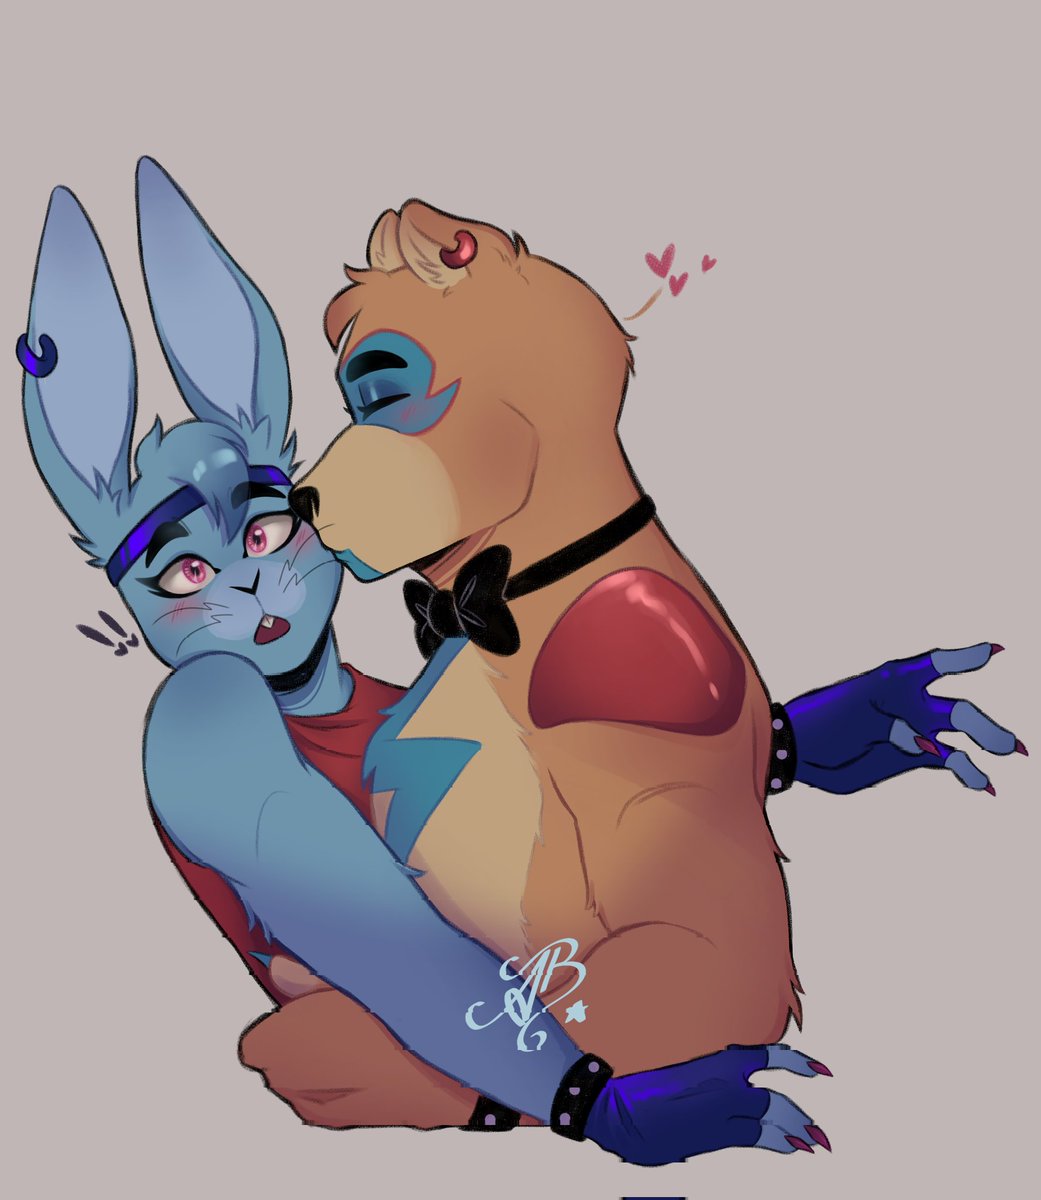 Careful Bonnie, or he might end up kissing you the whole day. ⭐

#GlamrockBonnie
#glamrockfreddy #fronnie #fnaf #fivenightsatfreeddys #glamrockfronnie #FNAFRuin